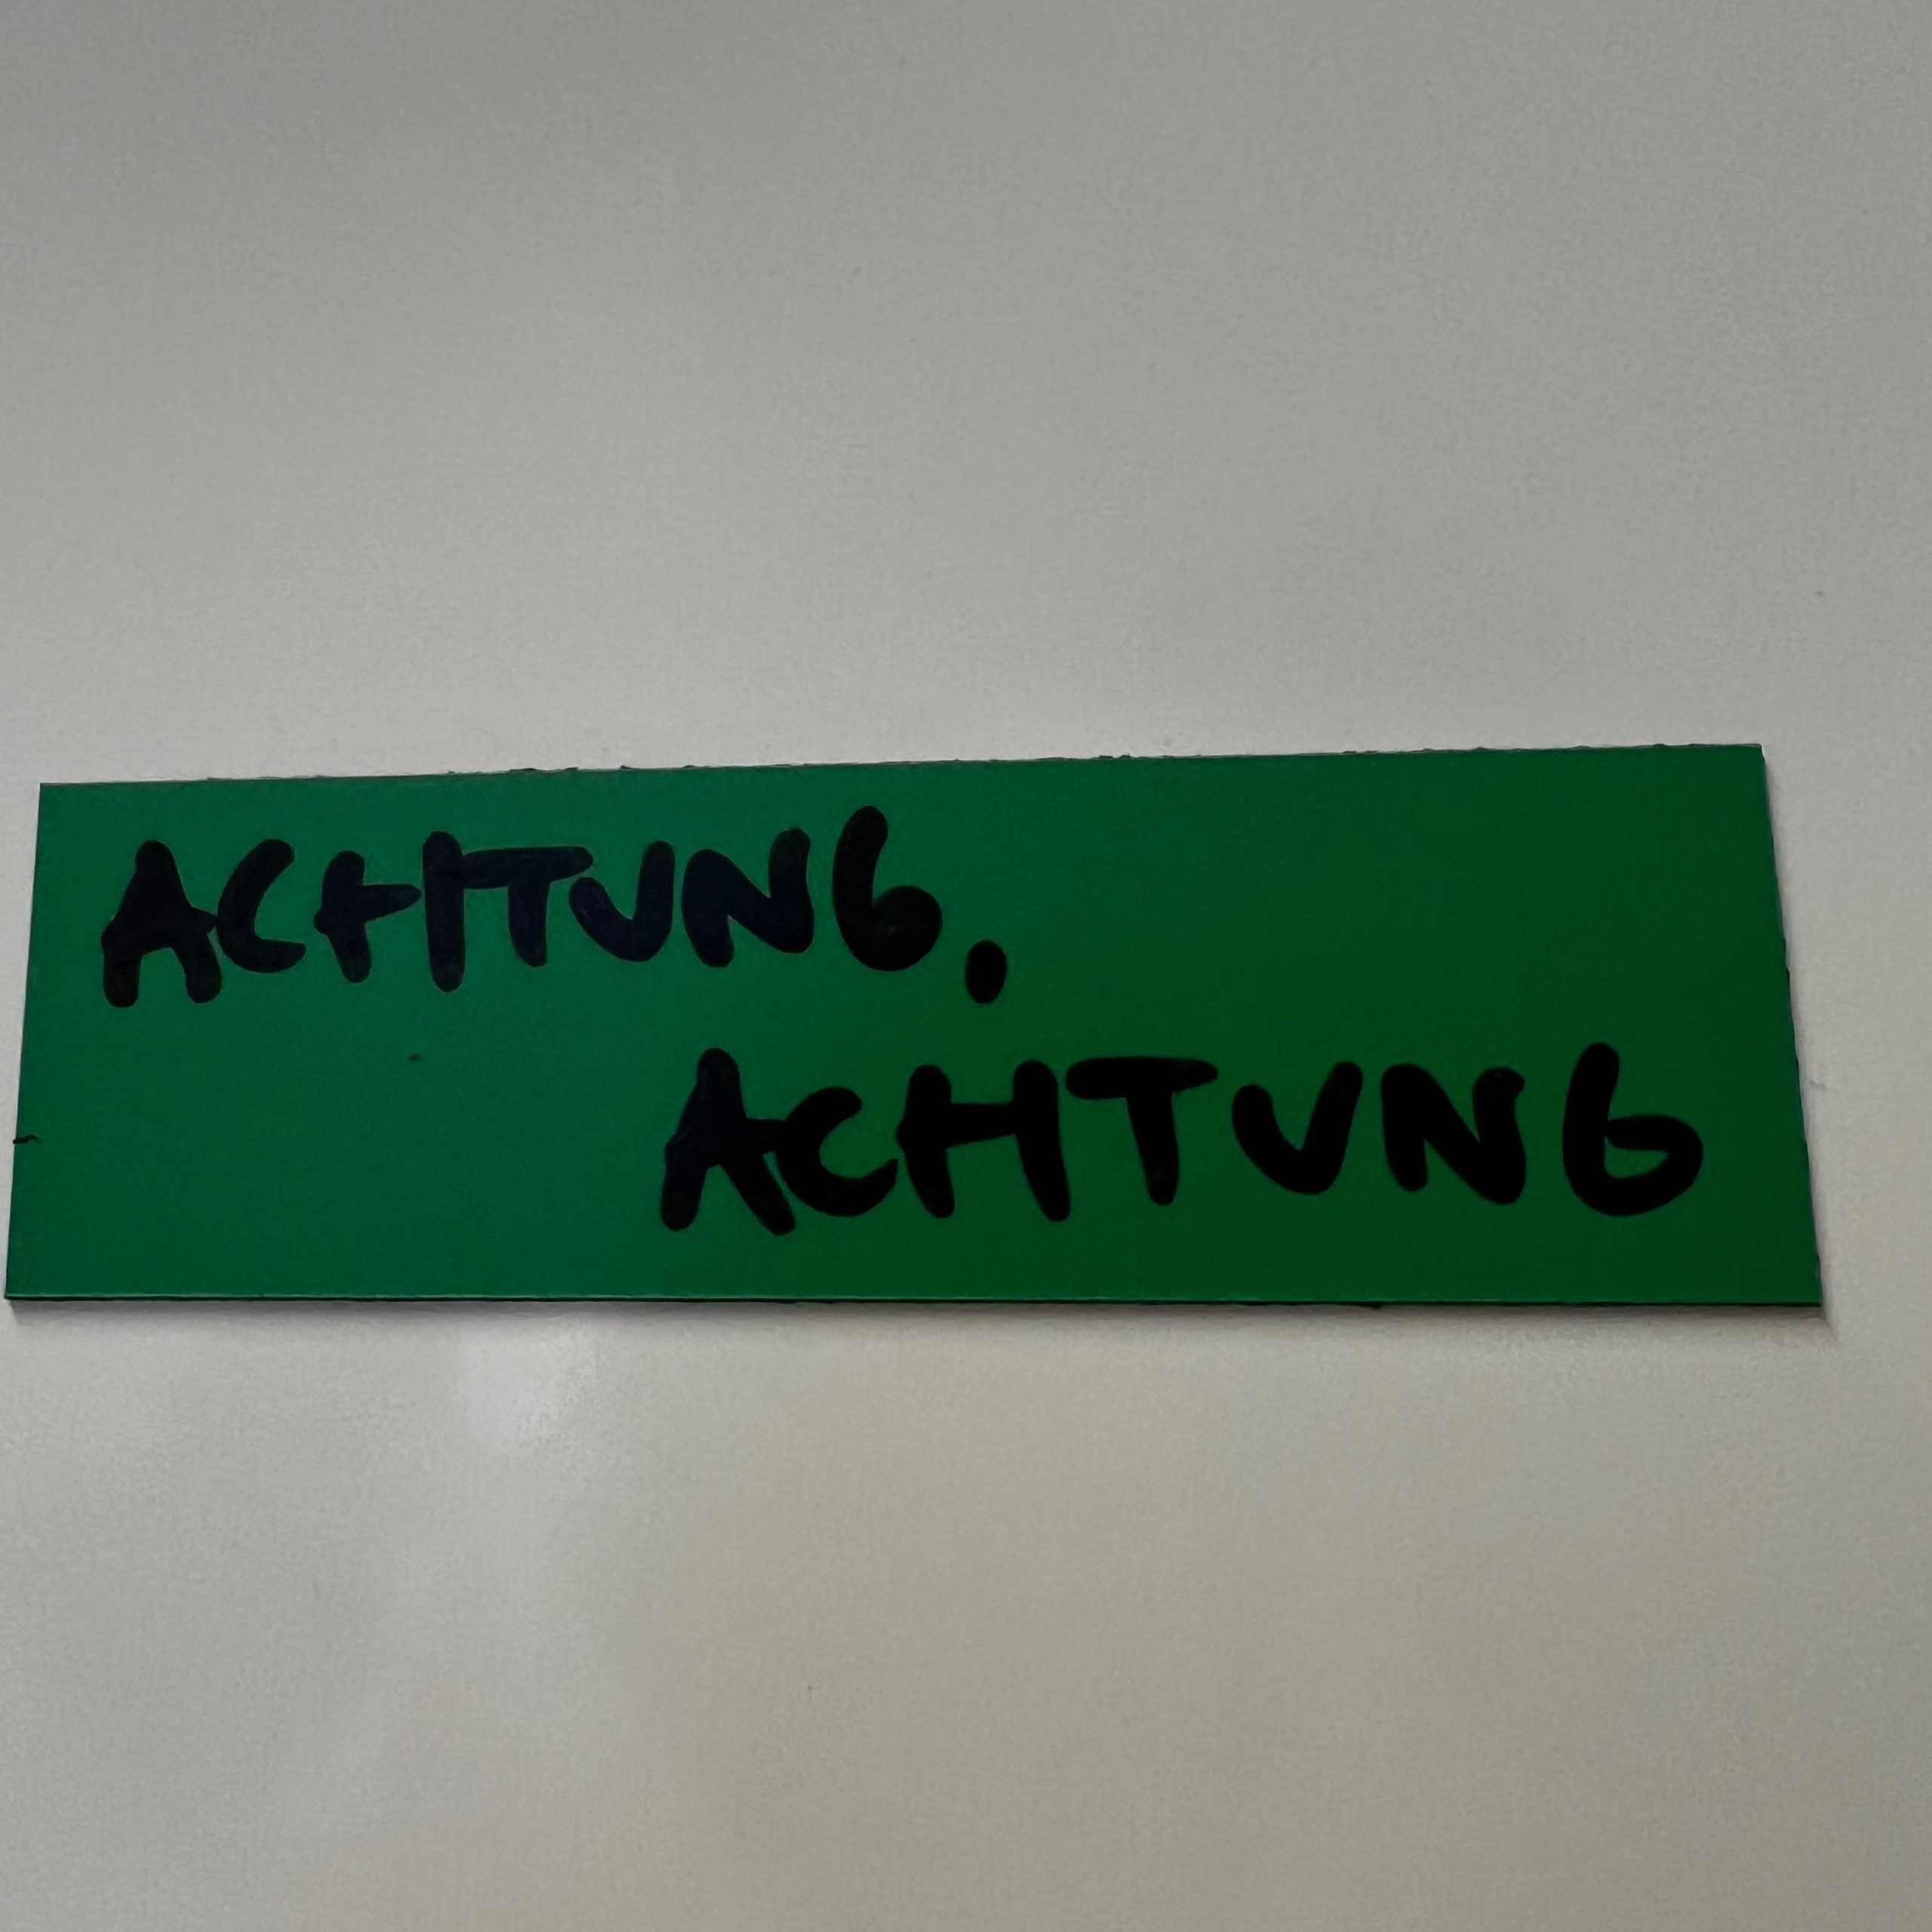 Achtung Achtung